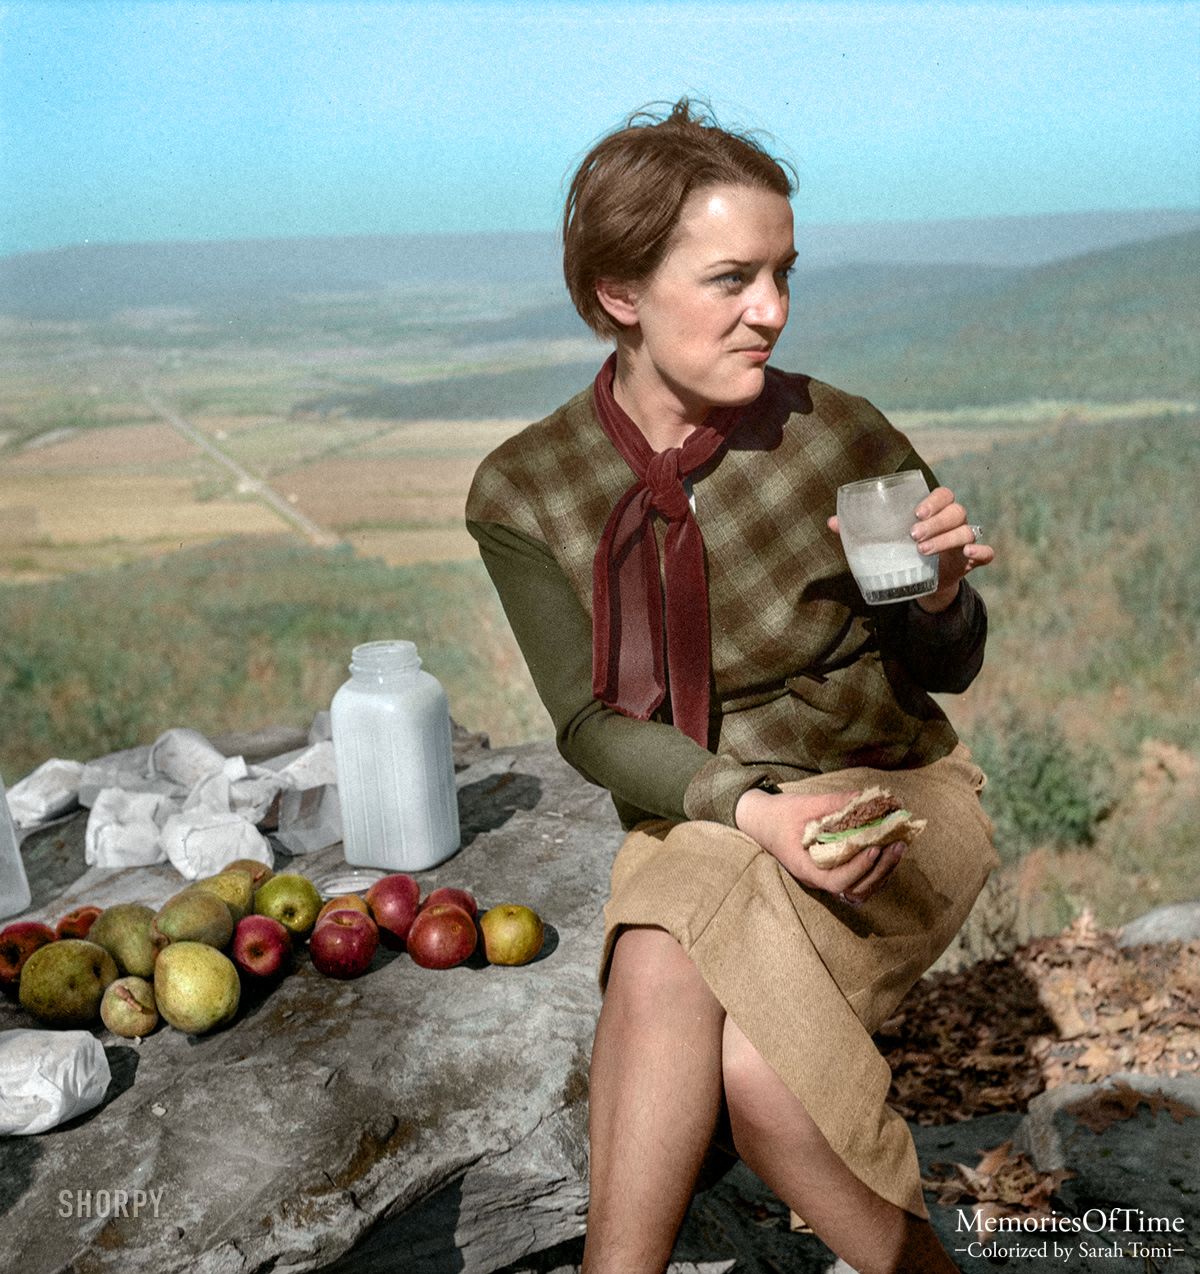 A colorized version of this Shorpy original. View full size.